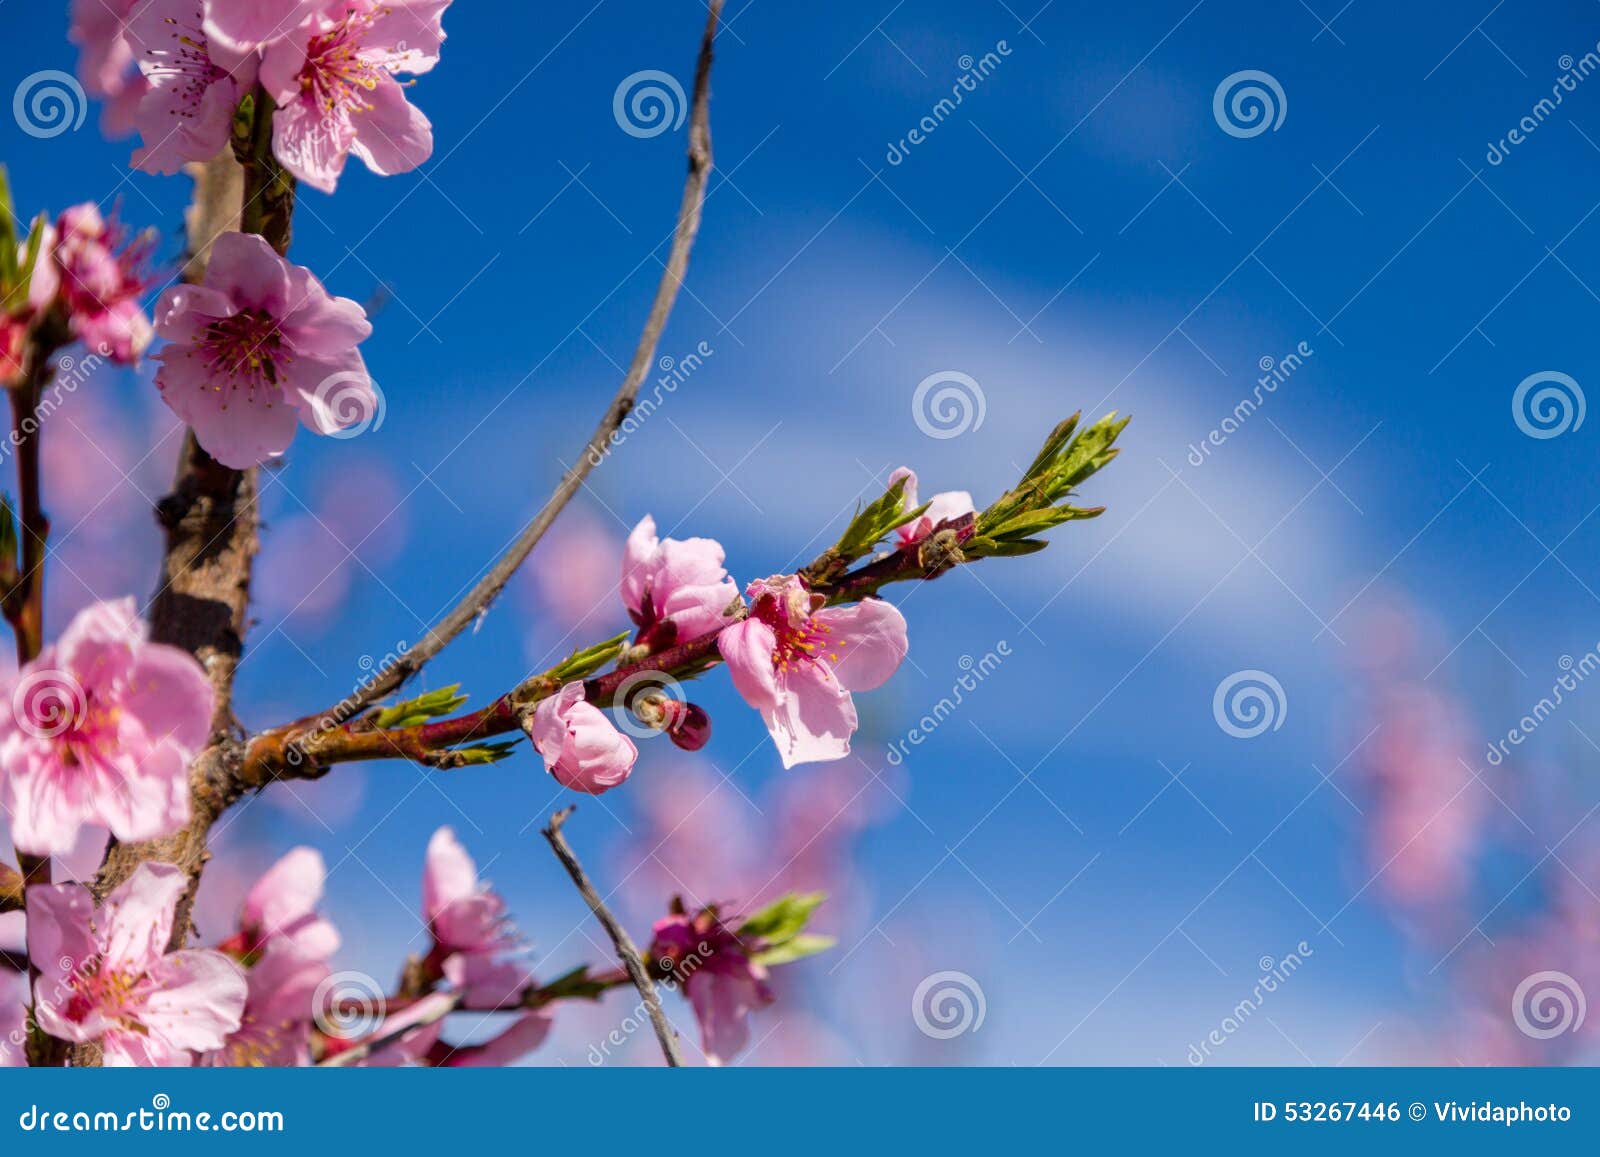 close-up details of blossoming peach trees treated with fungicides